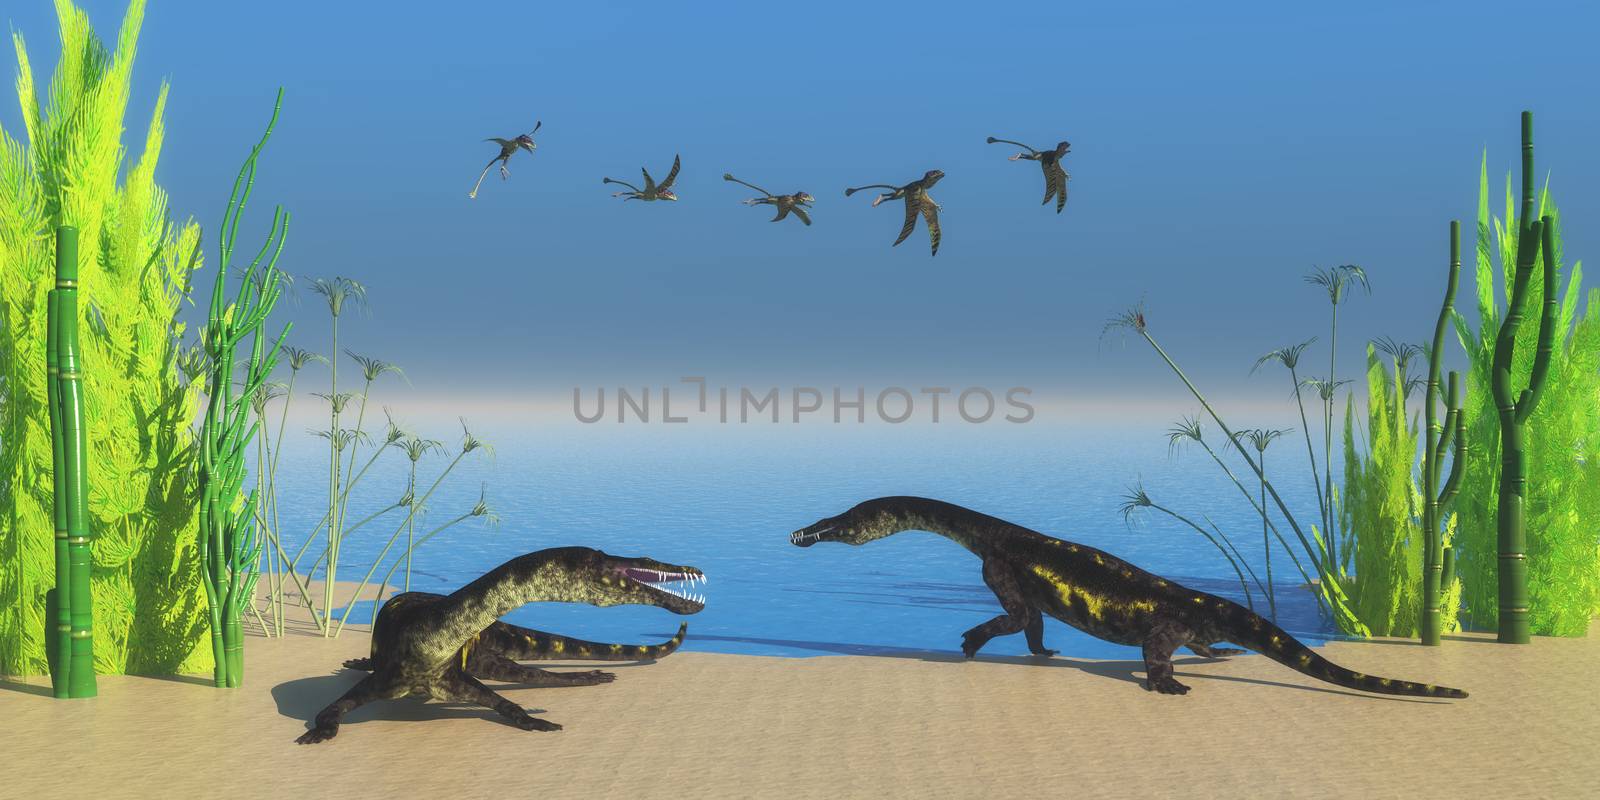 A flock of Peteinosaurus flying reptiles watch as two Nothosaurus dinosaurs growl at each other on a Triassic beach.